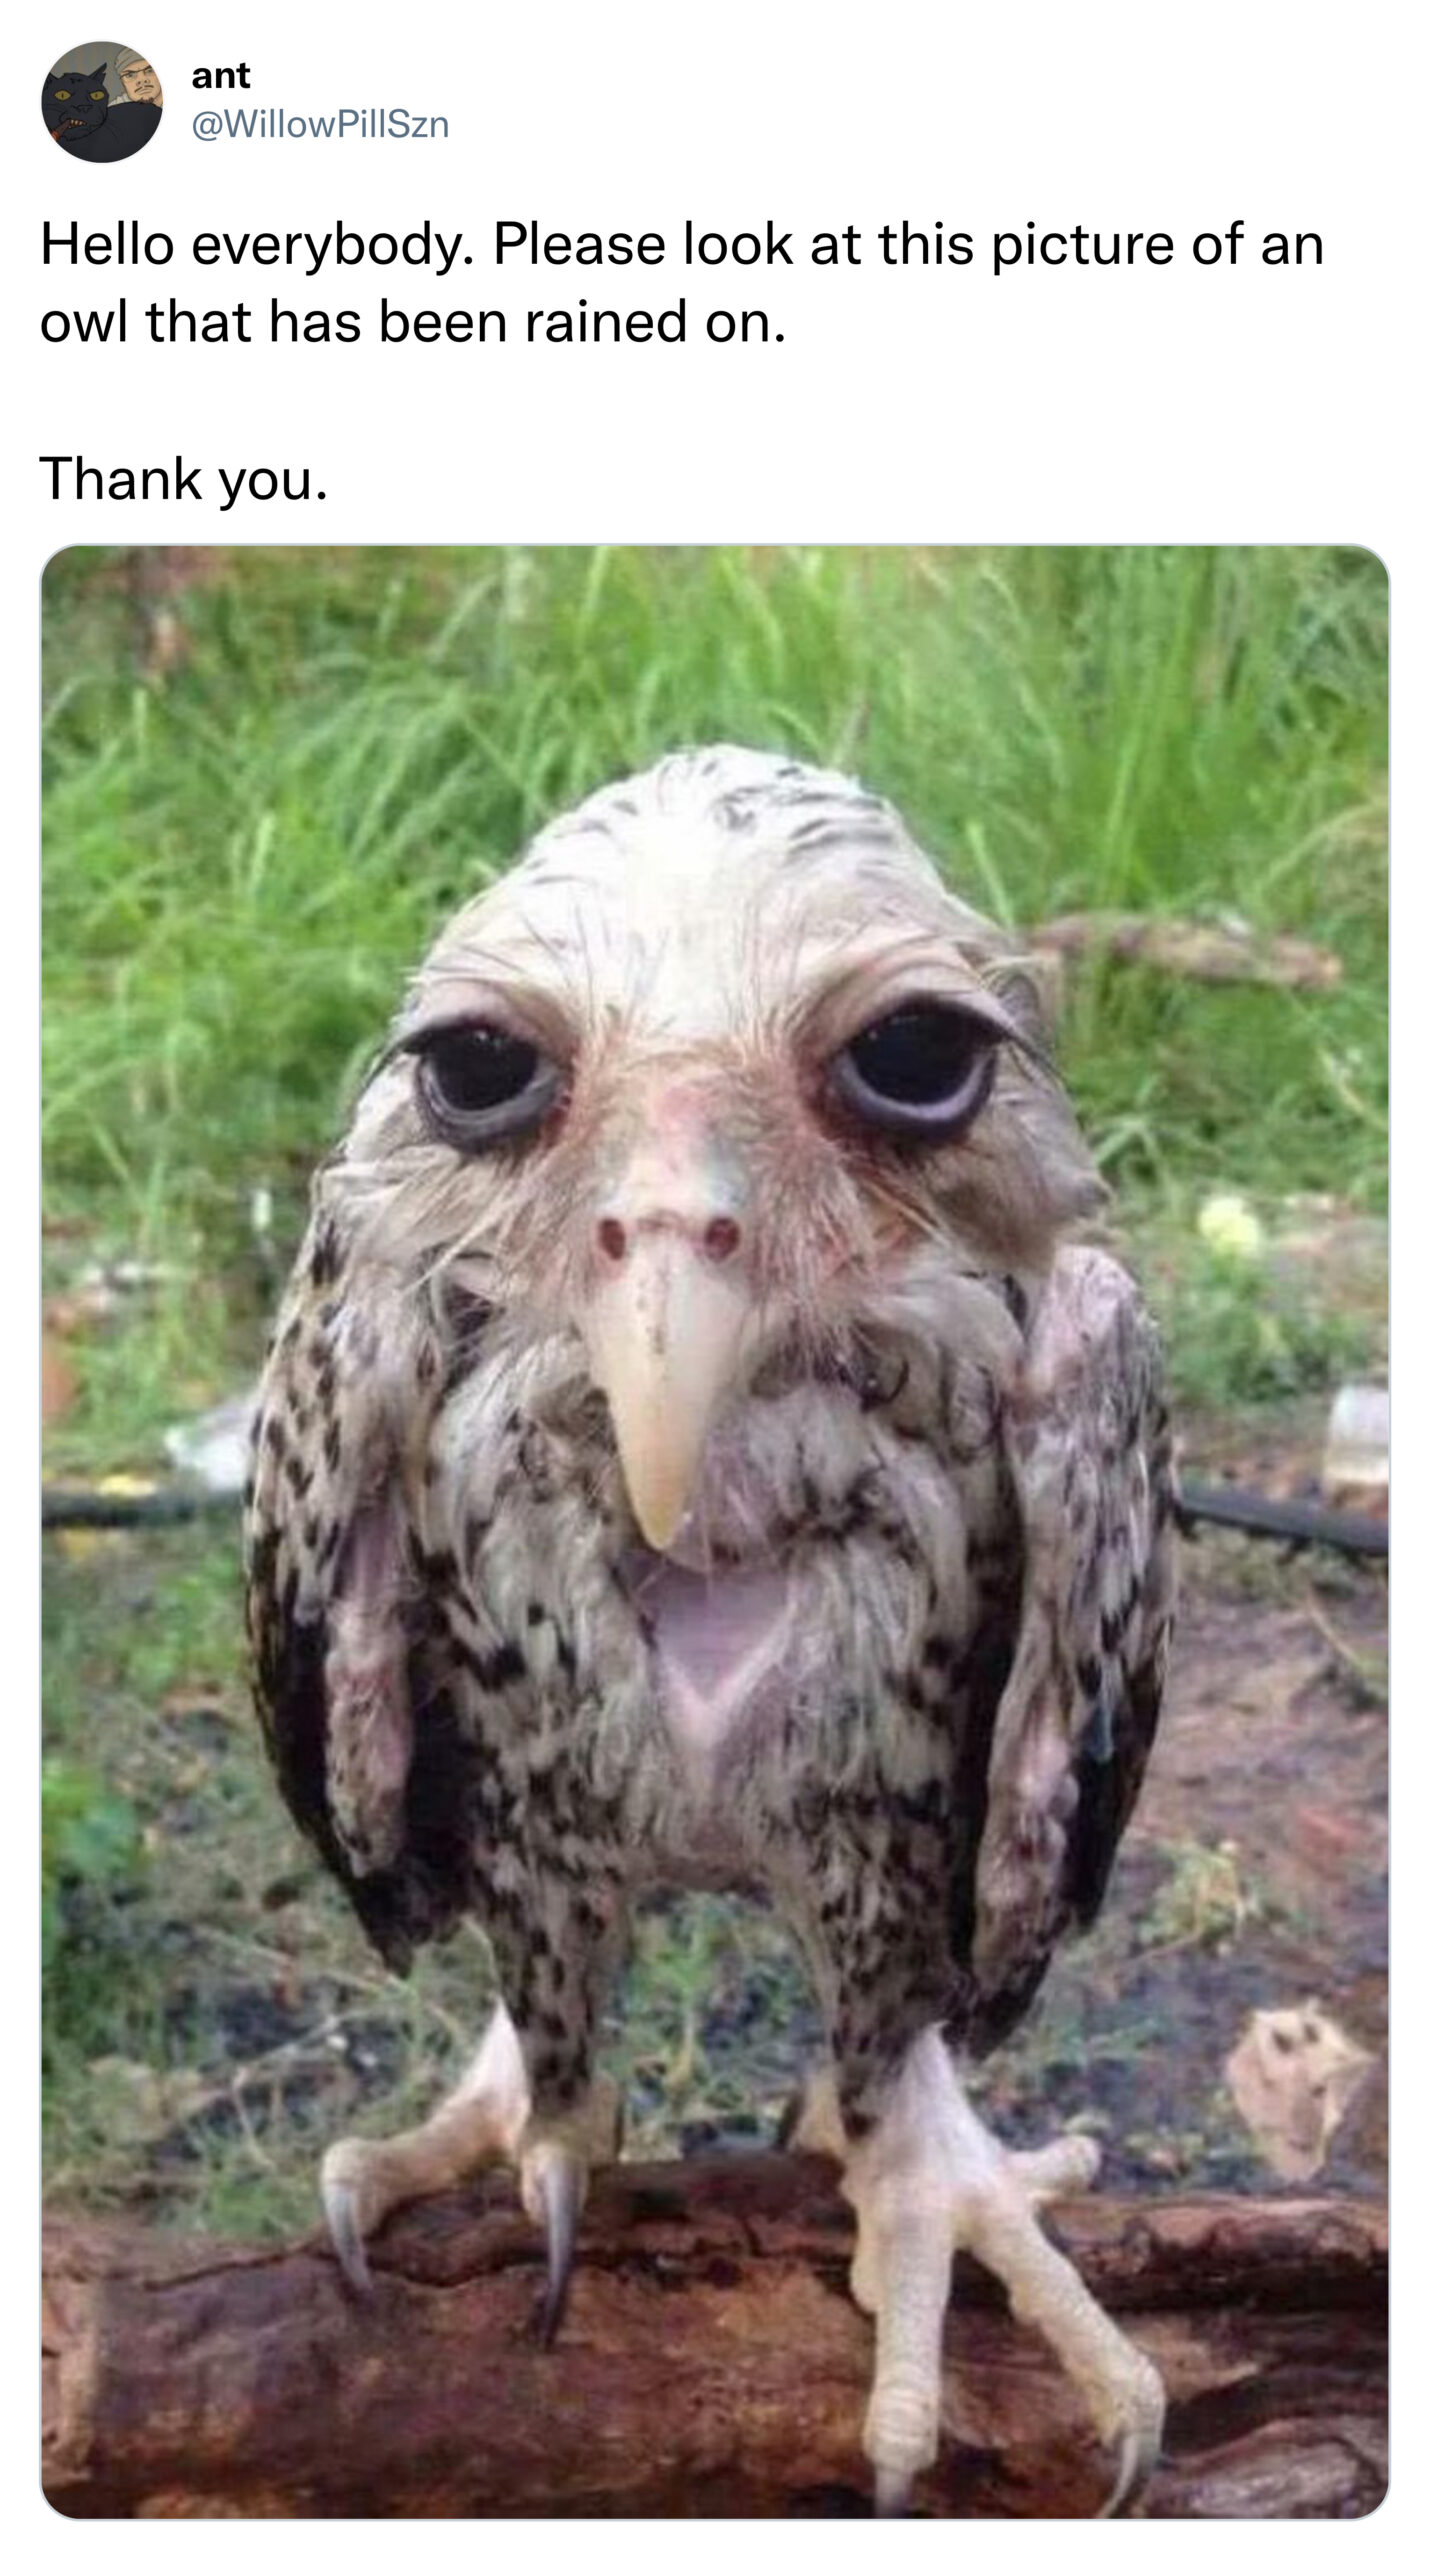 funny tweets - wet owl meme - ant Hello everybody. Please look at this picture of an owl that has been rained on. Thank you.